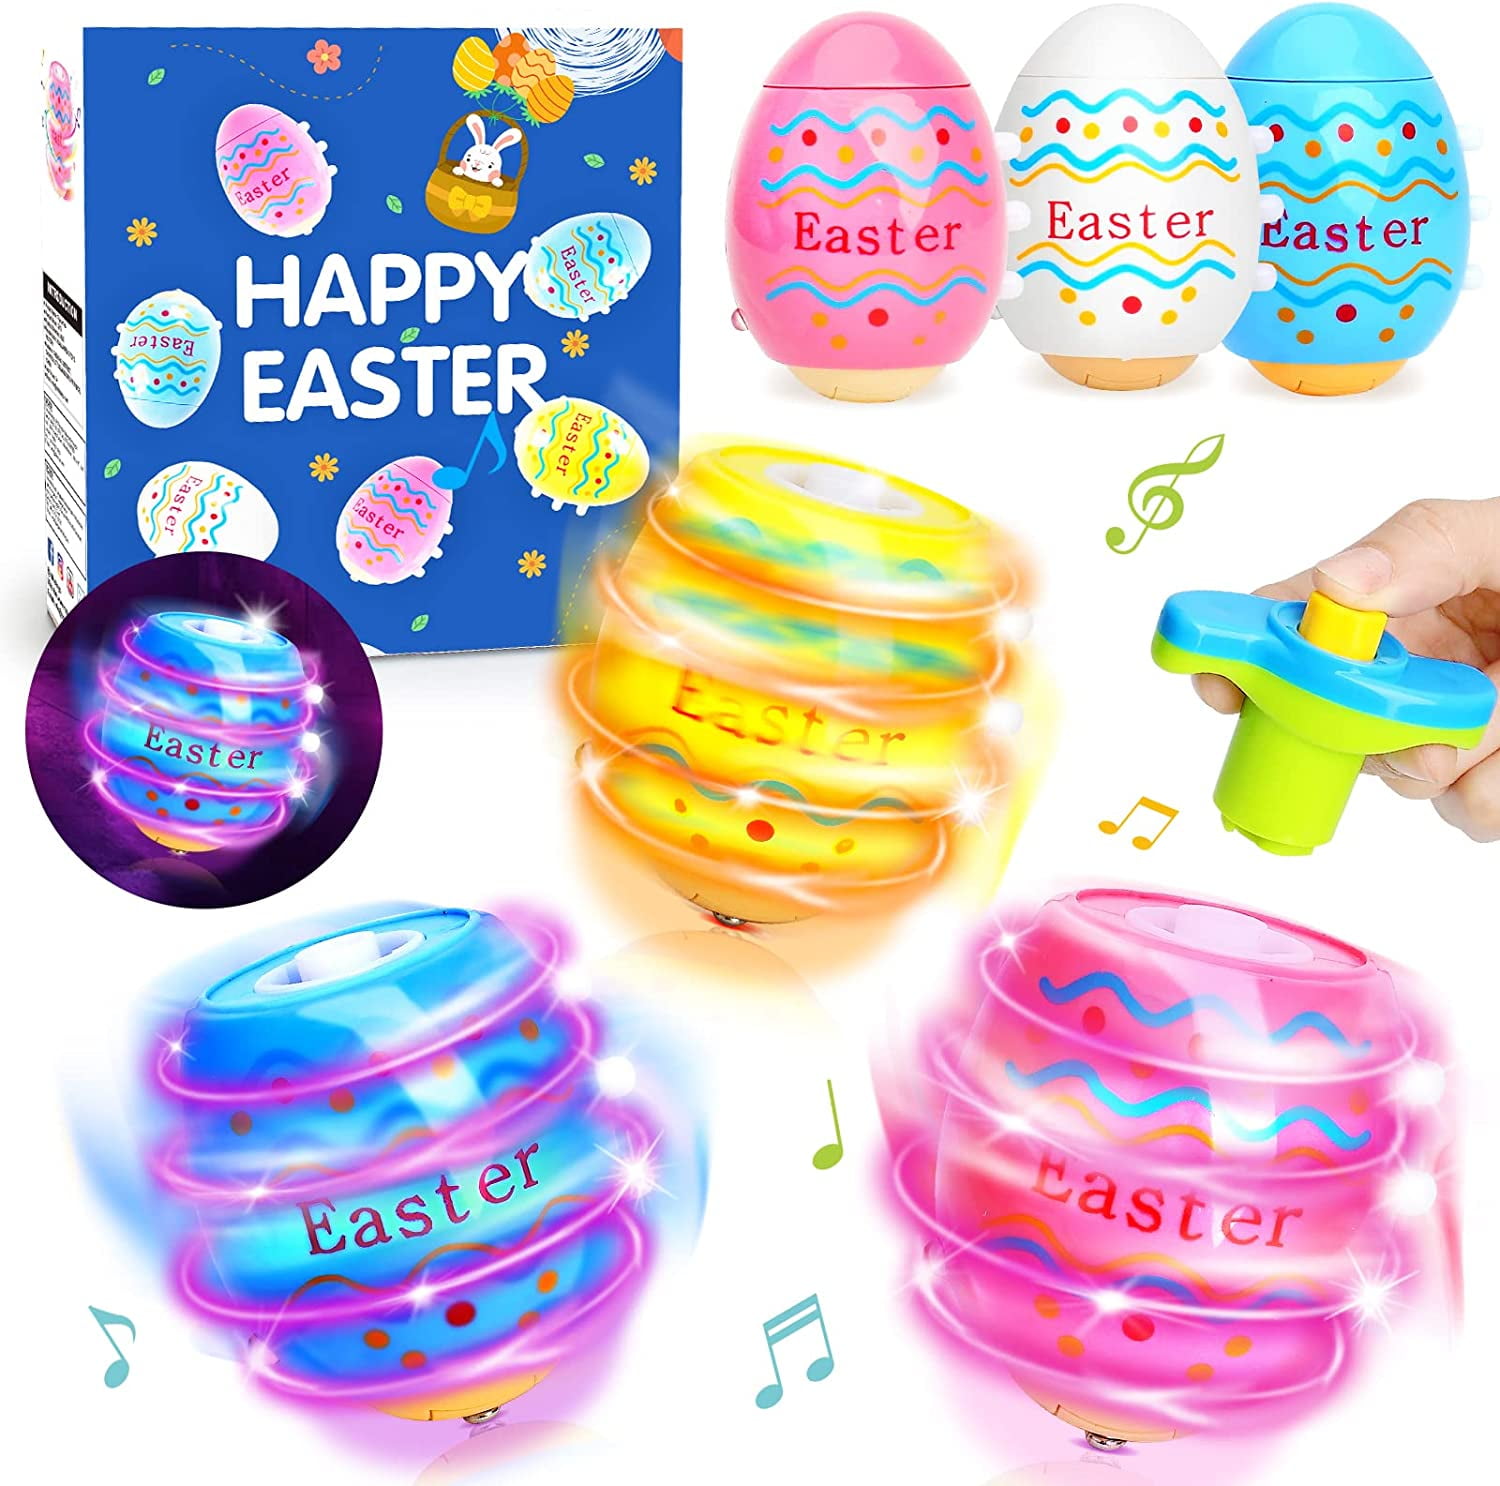 TuKIIE Bath Toys with Light Up Easter Eggs for Kids Toddlers, Magnetic  Fishing Games Set Pool Toys Christmas Easter Toys Gifts for Boys Girls 18  month 2 3 Year Olds : 